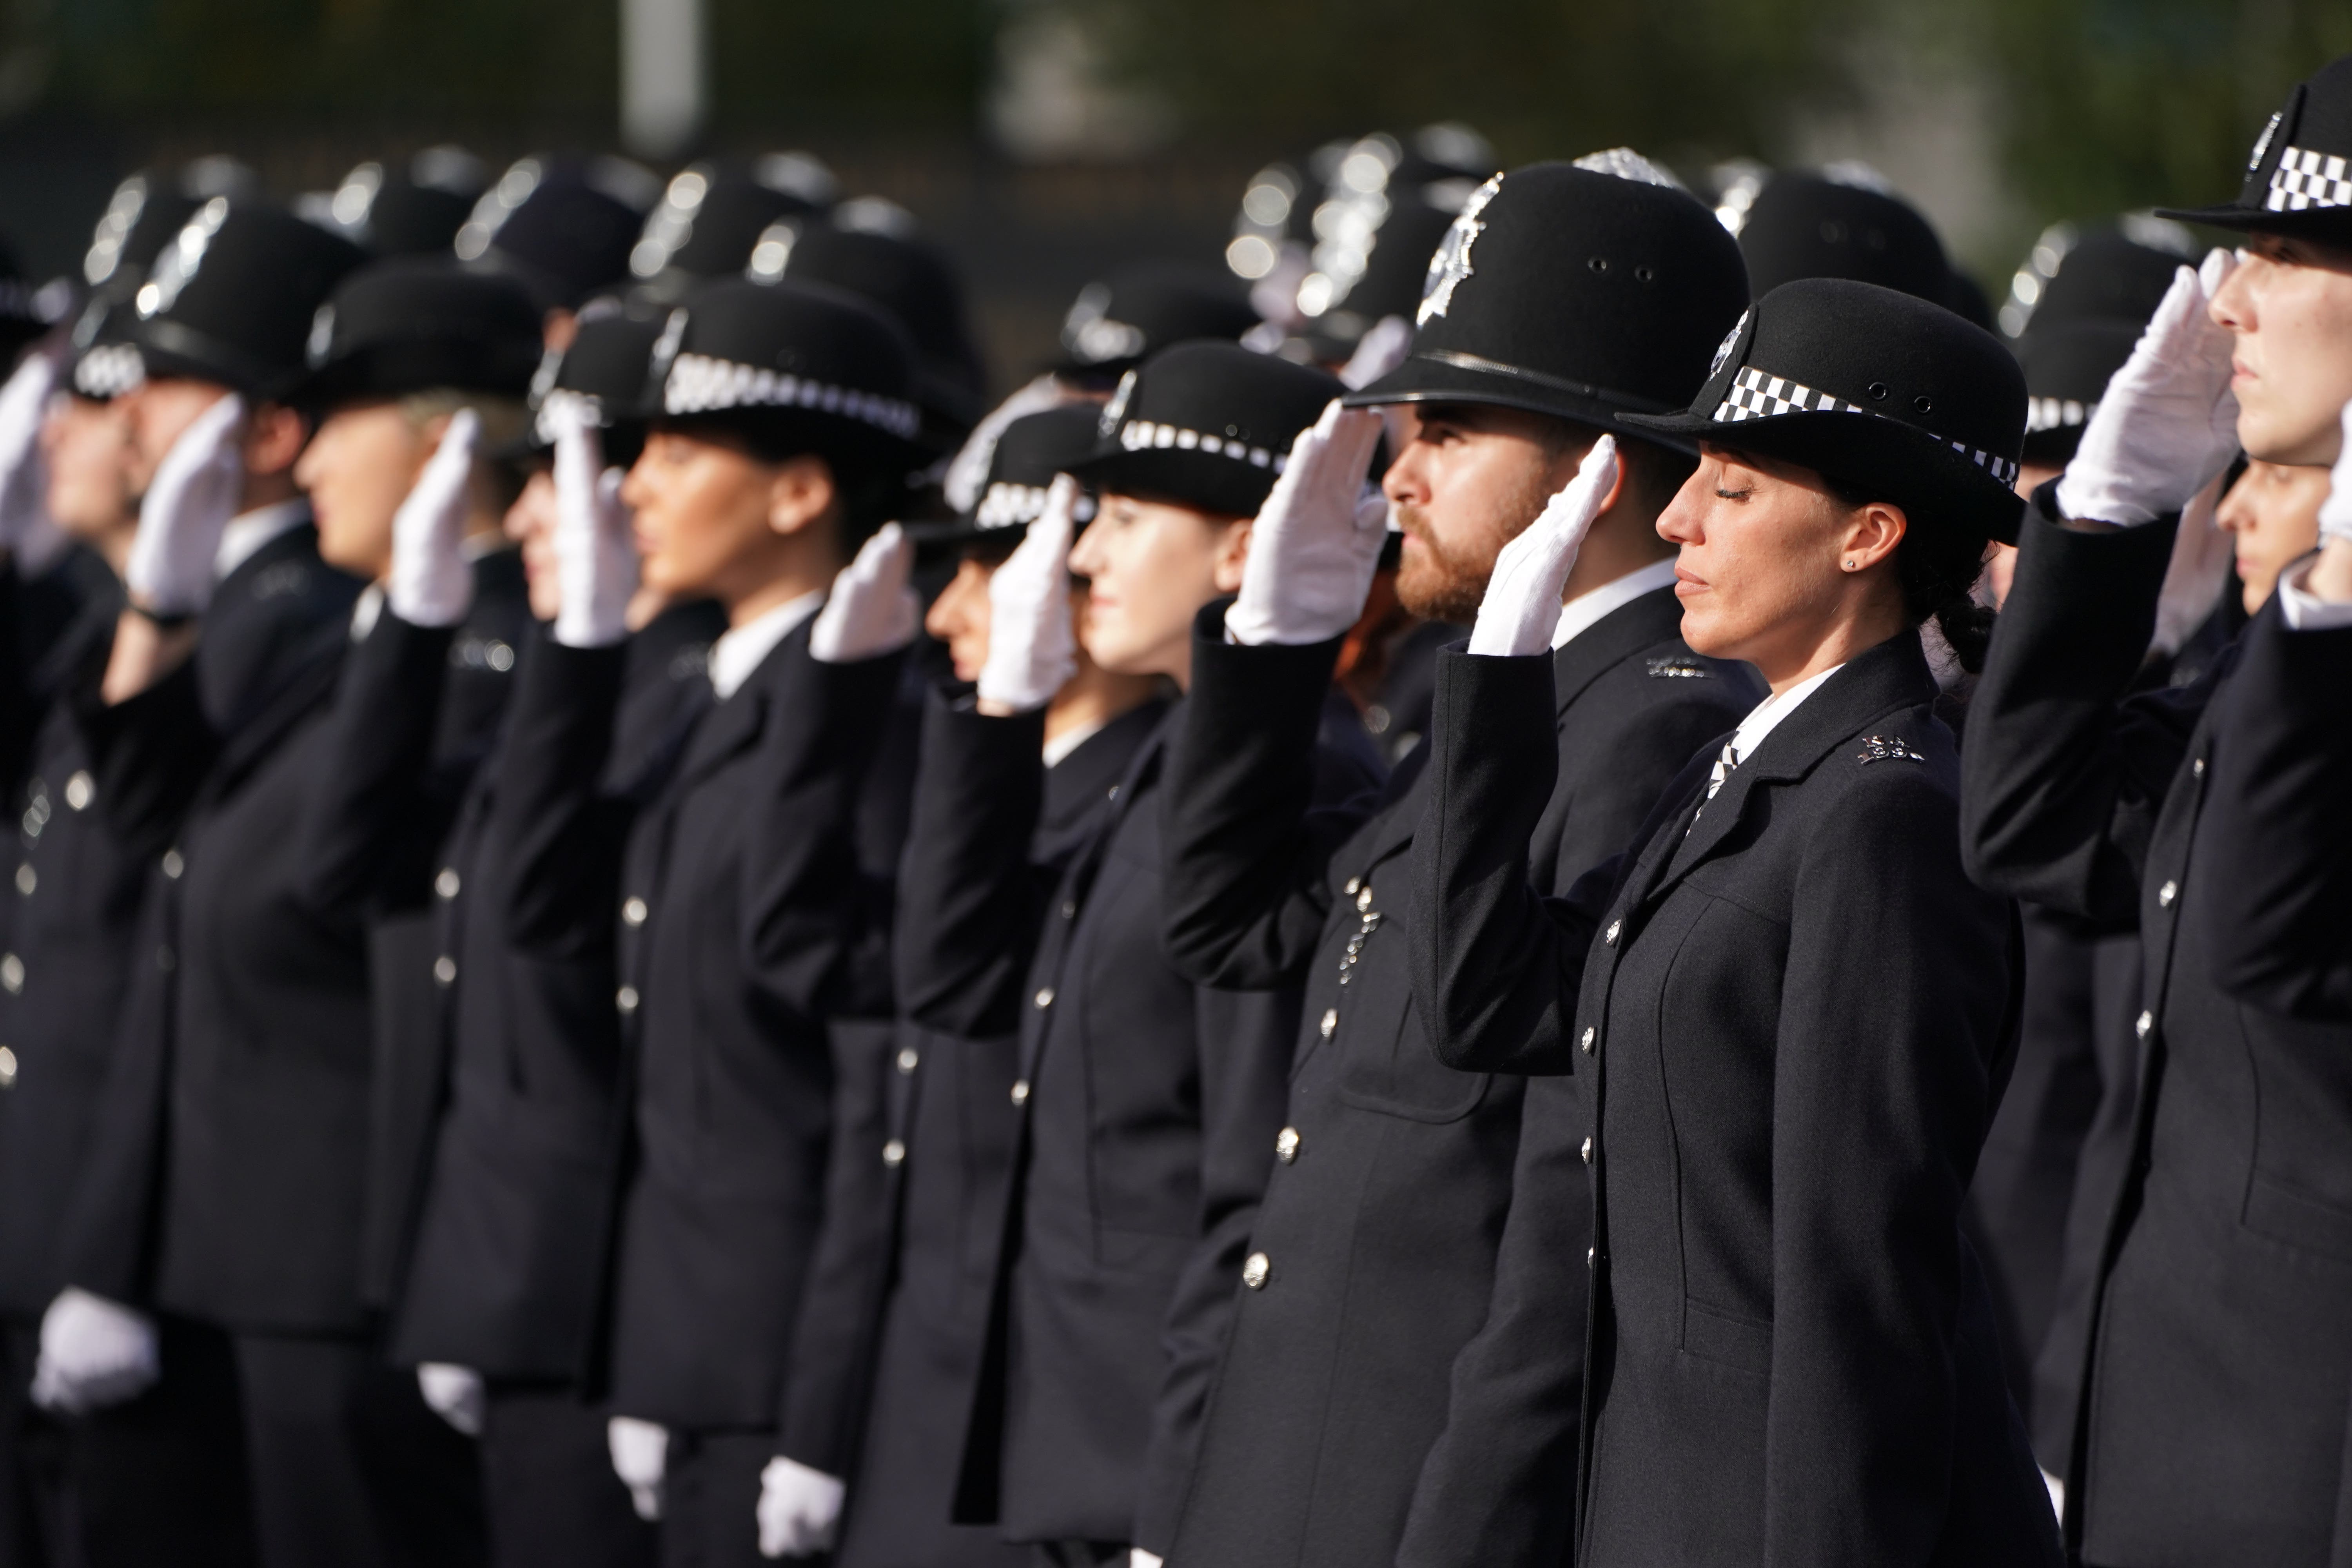 A former Met officer has said there is a toxic lads culture in the force, ahead of a damning review due to be published this week (Kirsty O’Connor/PA)